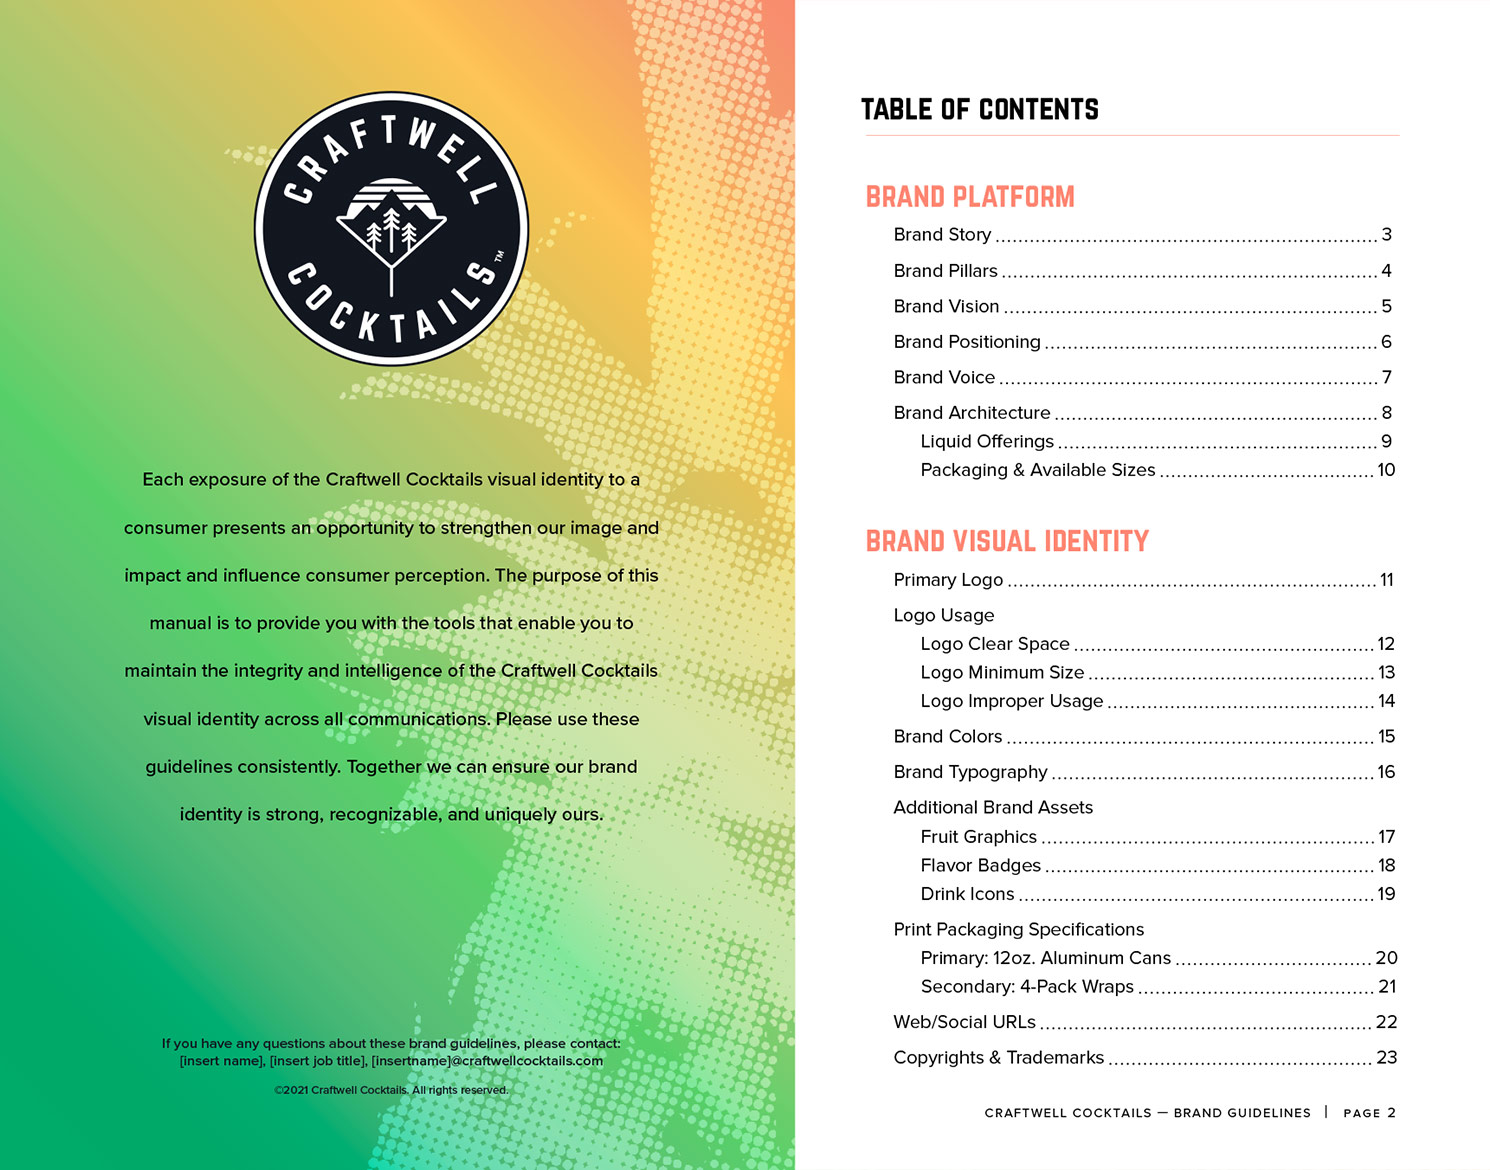 Craftwell Cocktails brand guidelines table of contents page